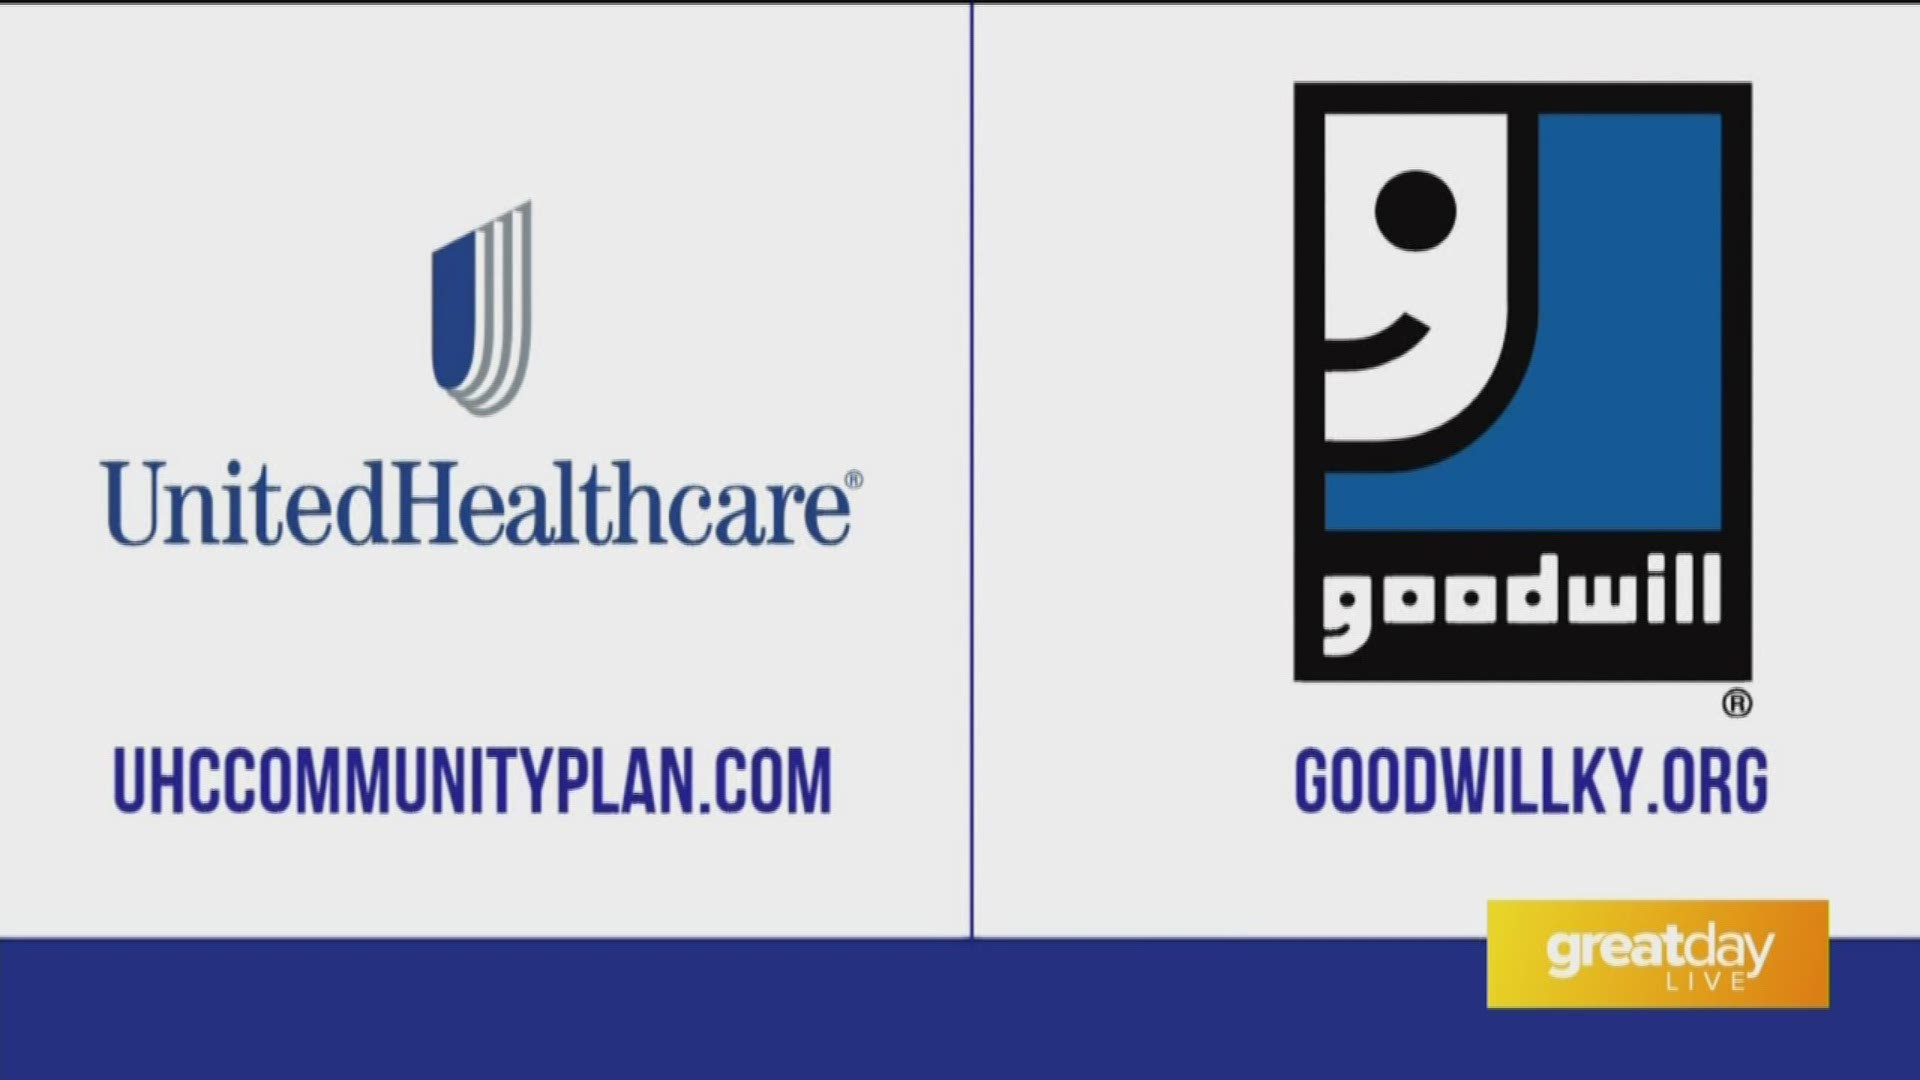 To learn more about United Healthcare, go to UHCCommunityPlan.com. For more on Goodwill Kentucky, check them out at GoodwillKy.org.